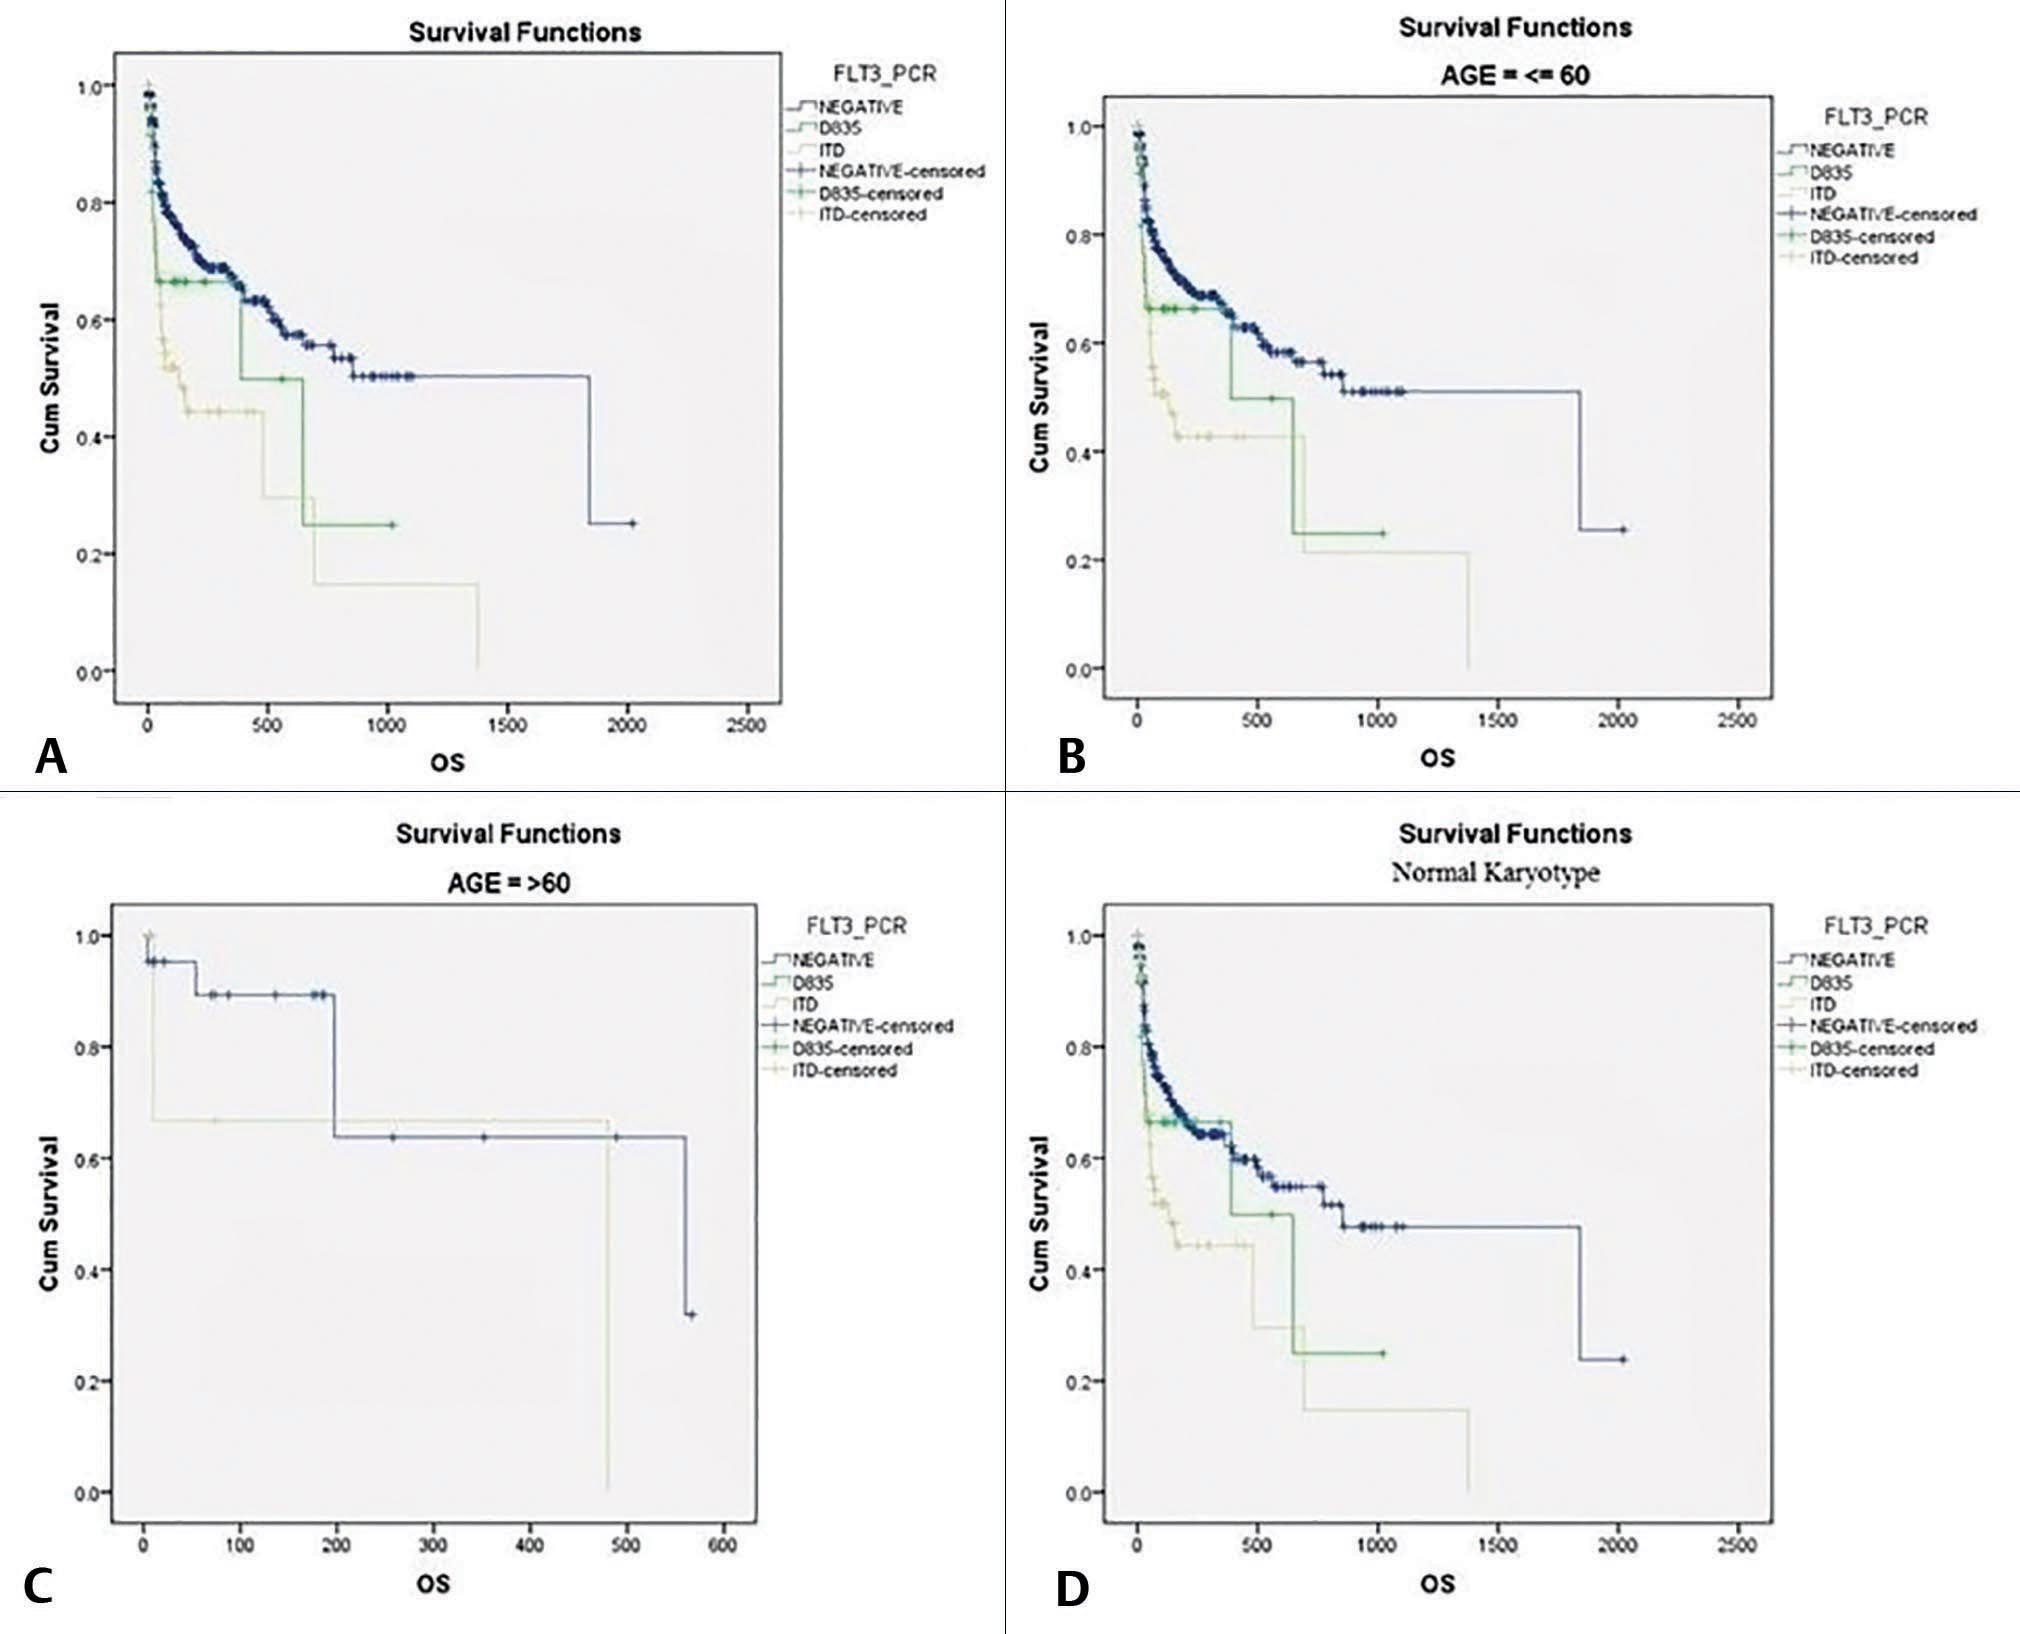 Fig. 2 Survival analysis (Kaplan–Meier method). (A) OS in different groups of AML patients. (B) Survival in younger patients (≤60 years) in different groups. (C) Survival in older patients (>60 years). (D) Survival in normal karyotype patients of different groups of AML. AML, acute myeloid leukemia; FLT3, FMS-like tyrosine kinase 3; ITD, internal tandem duplication; PCR, polymerase chain reaction; OS, overall survival.